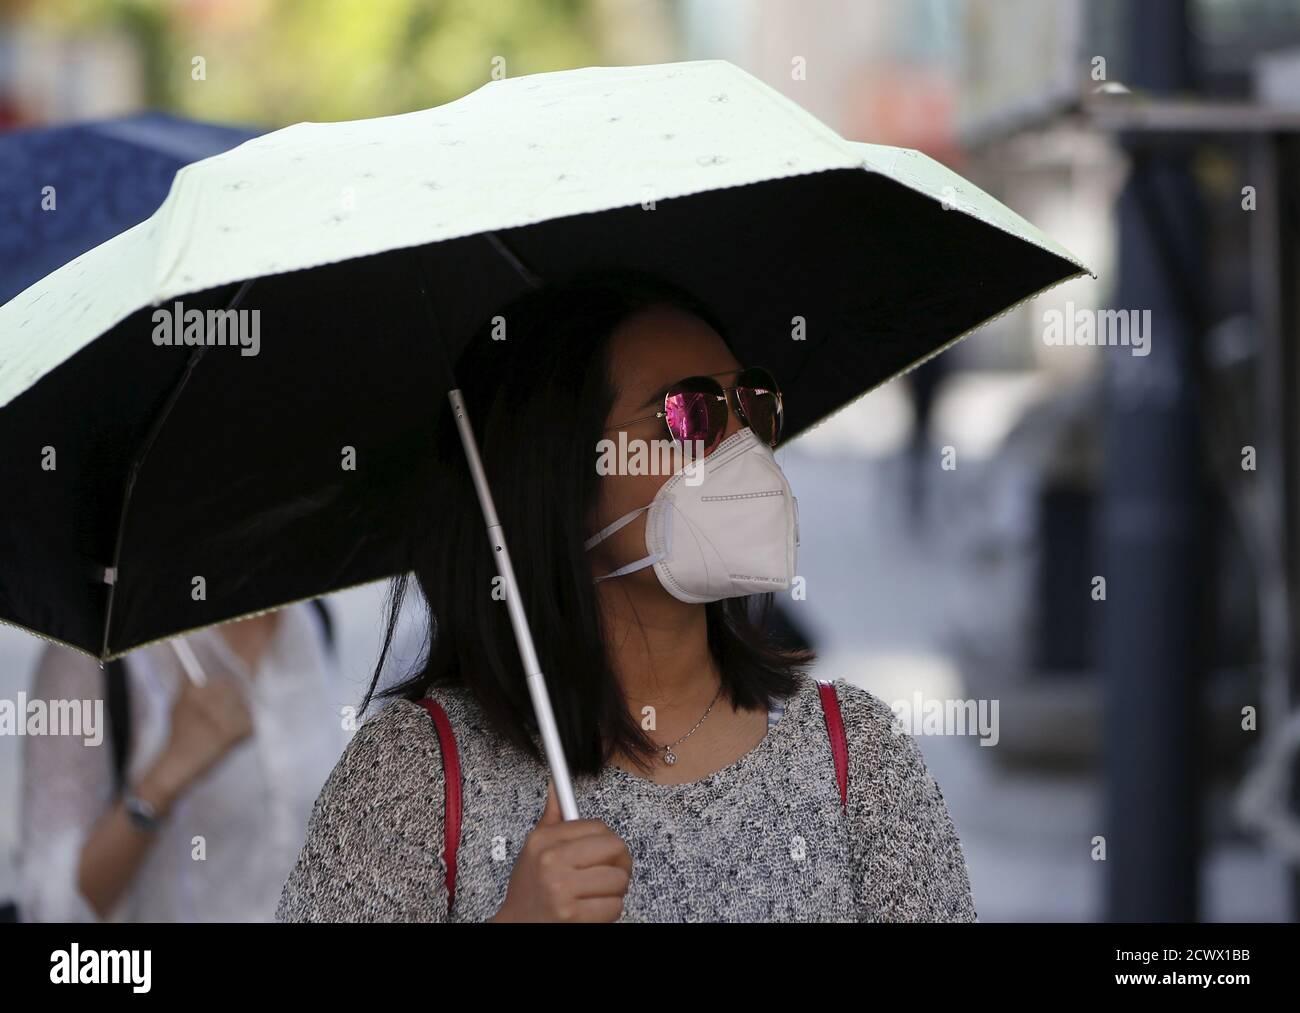 A tourist wearing a mask to prevent contracting Middle East Respiratory Syndrome (MERS), walks at Myeongdong shopping district in central Seoul, South Korea June 3, 2015. South Korea confirmed five more cases of the Middle East Respiratory Syndrome (MERS) virus, the health ministry said early on Wednesday, bringing to 30 the total number of cases in the country of the often-deadly illness.  REUTERS/Kim Hong-Ji      TPX IMAGES OF THE DAY Stock Photo